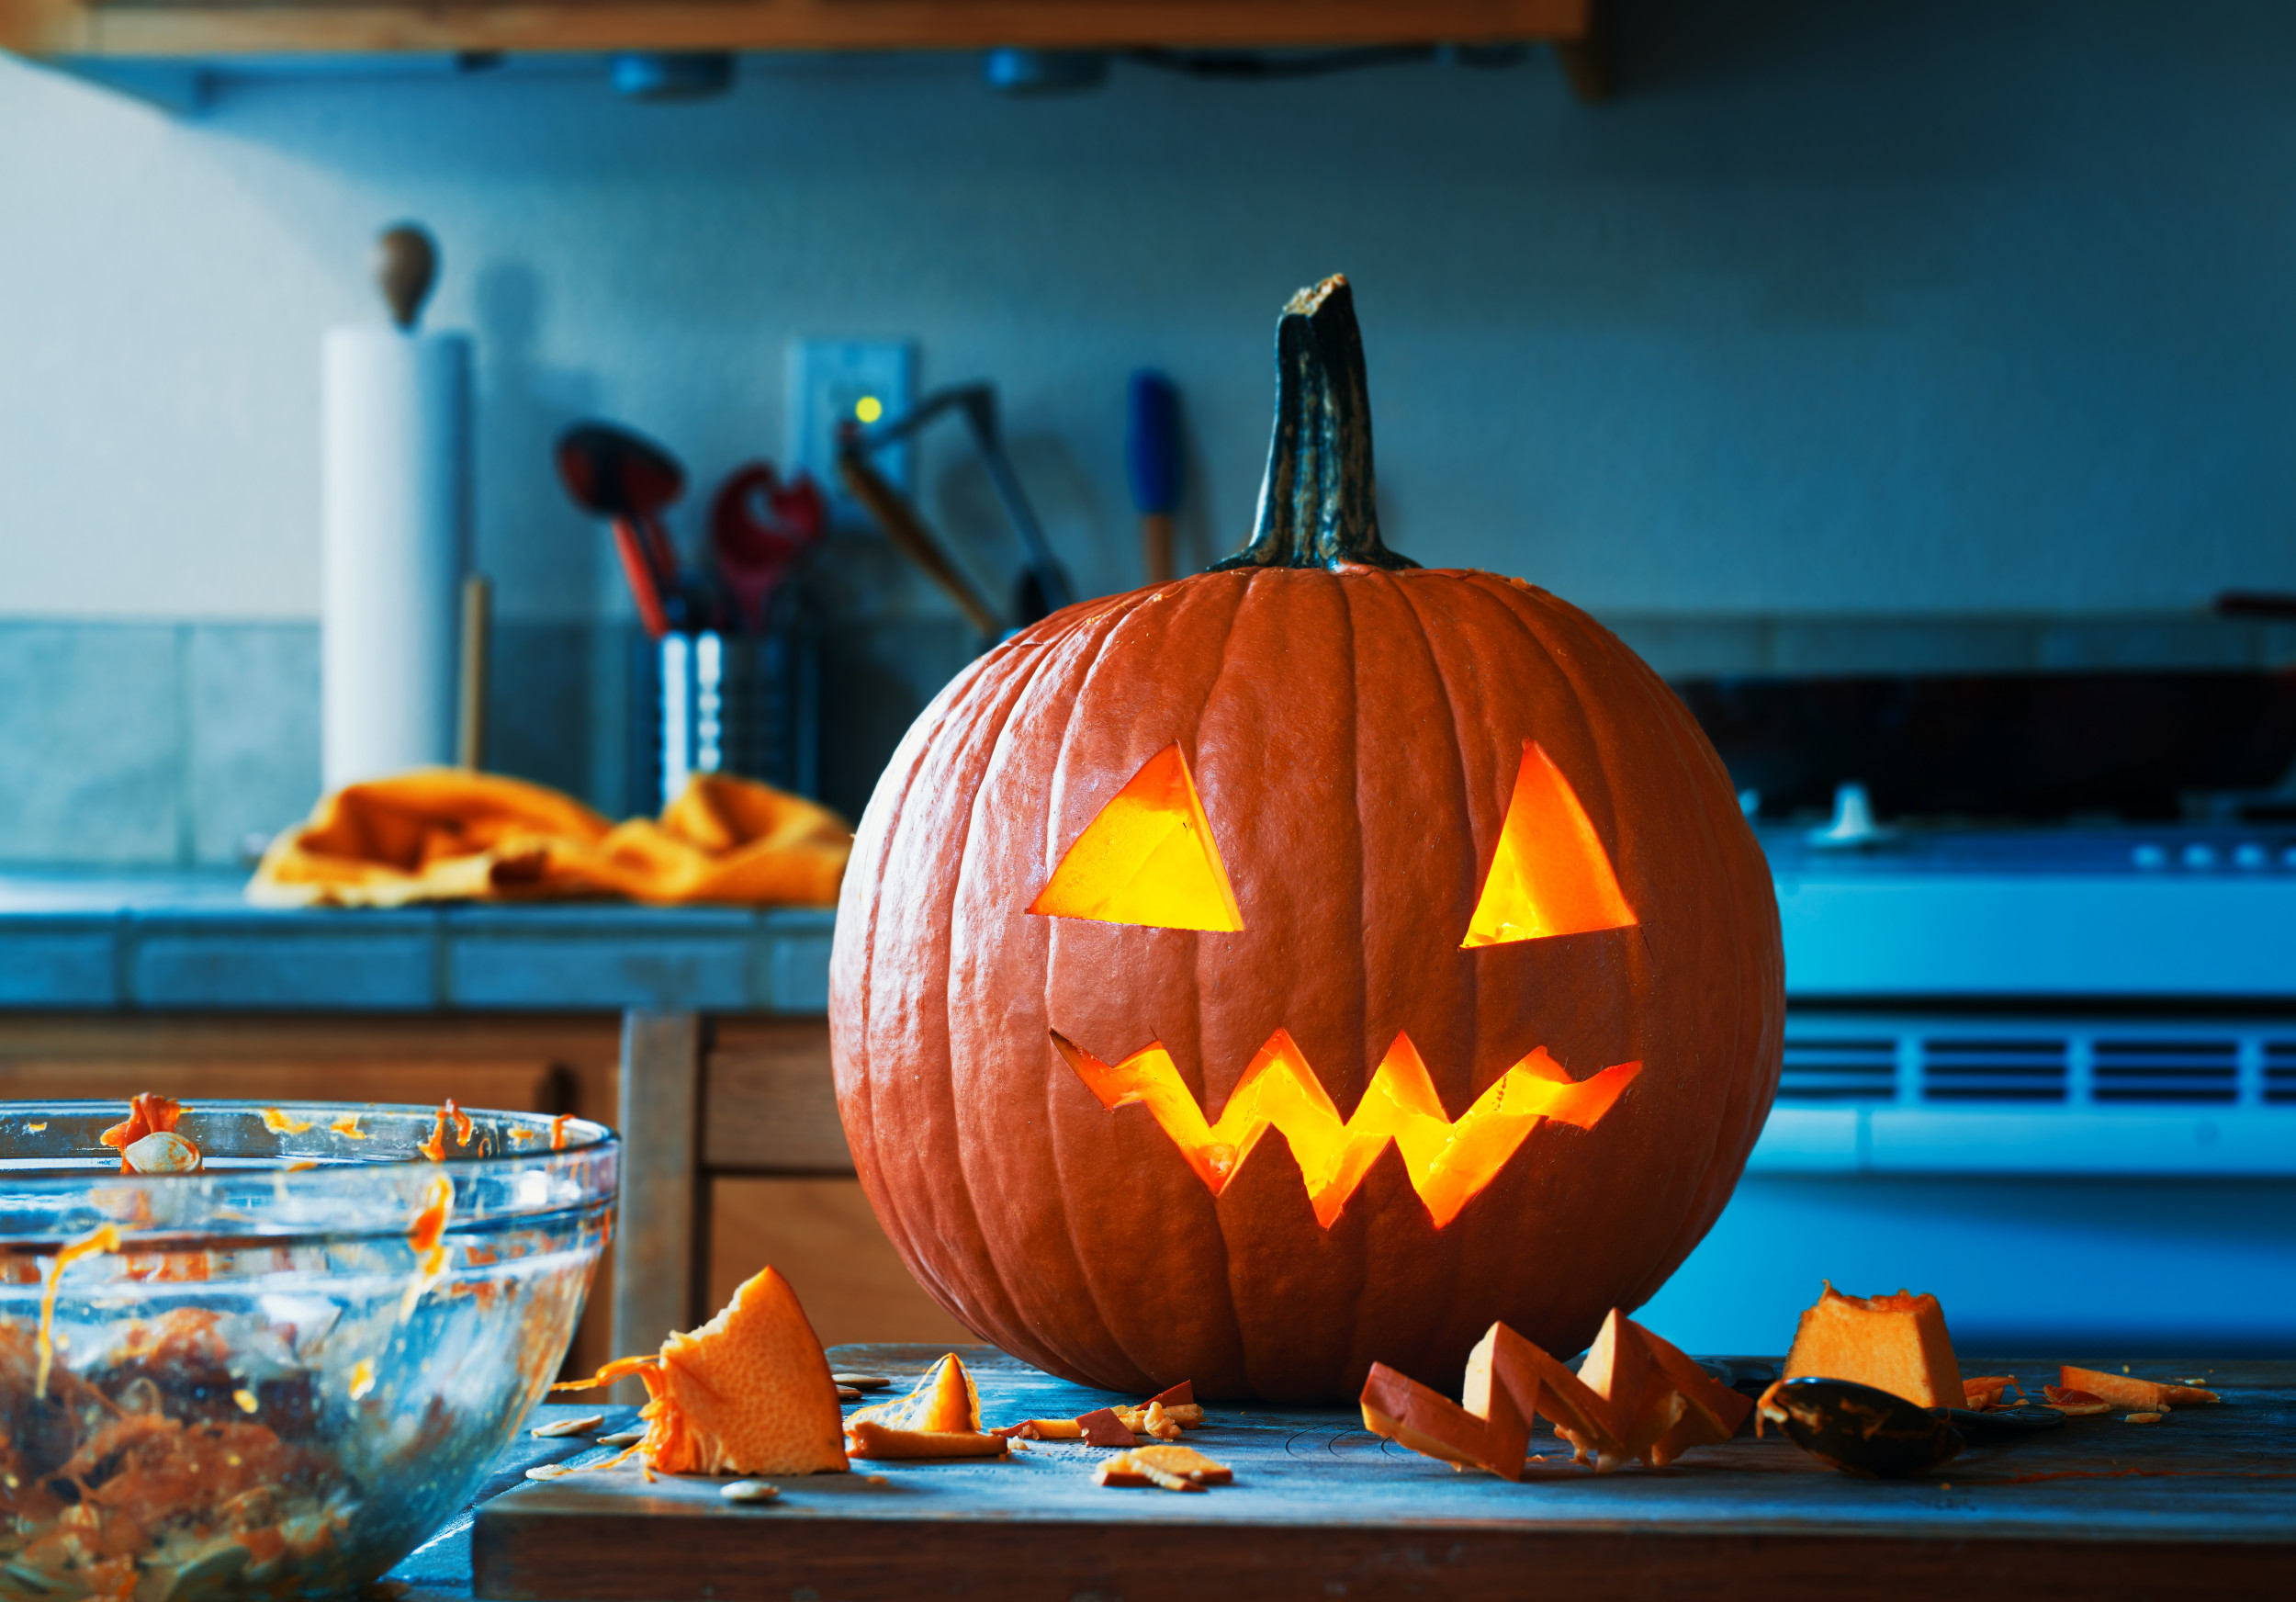 3 mistakes you make when carving a pumpkin, according to an expert